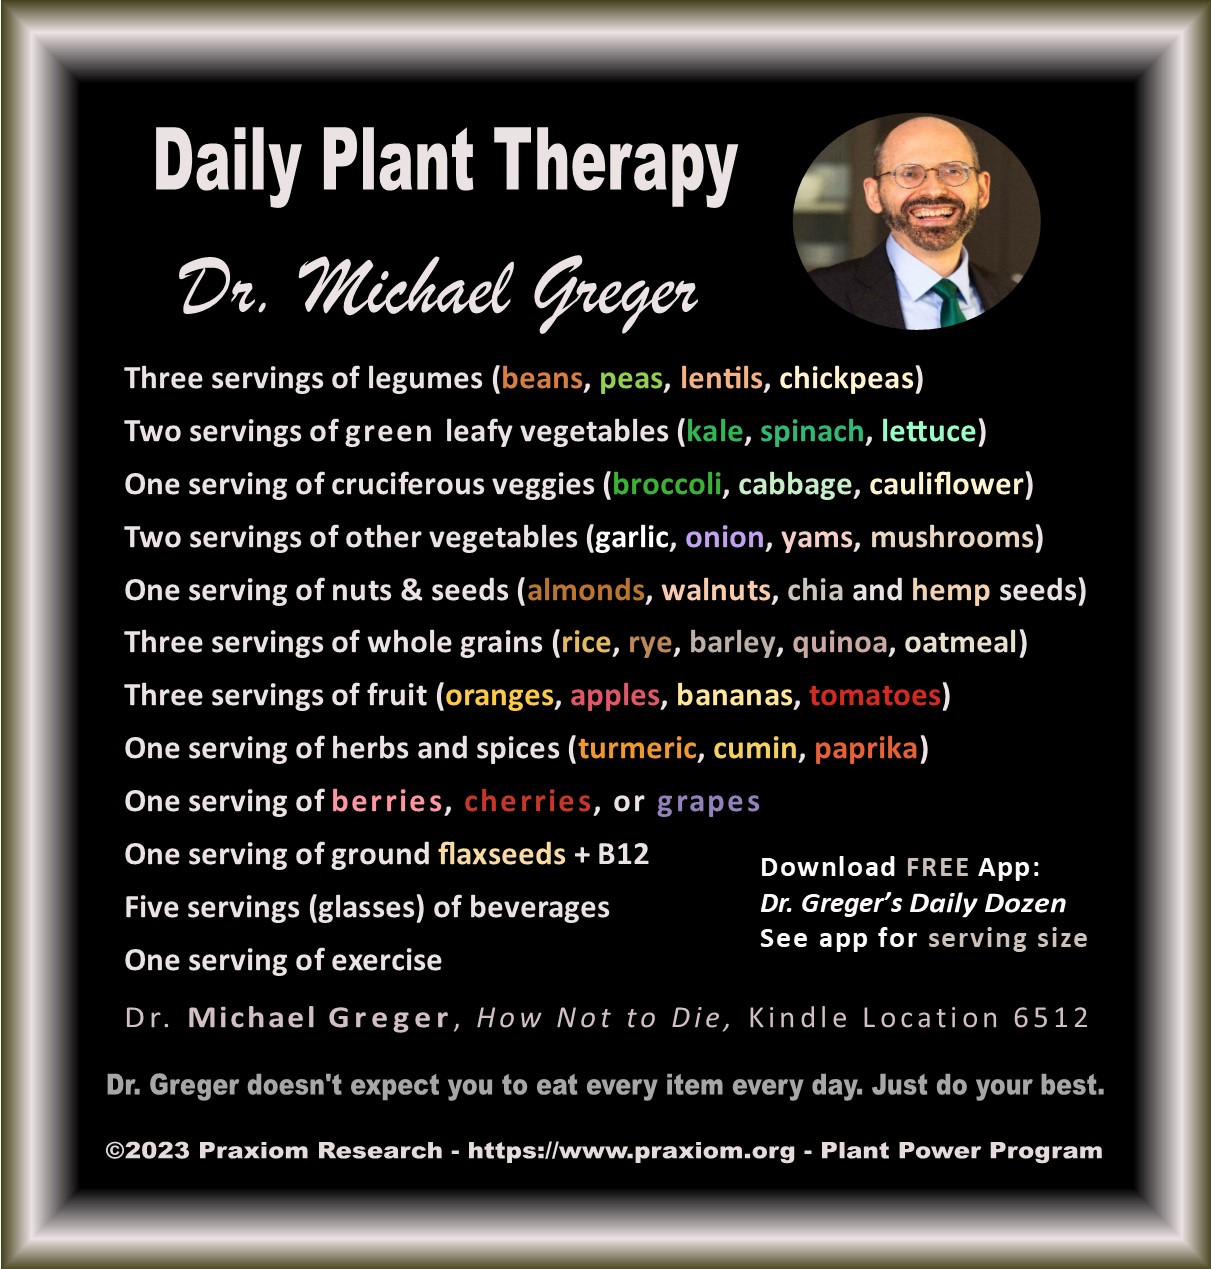 Daily Plant Therapy - Dr. Michael Greger